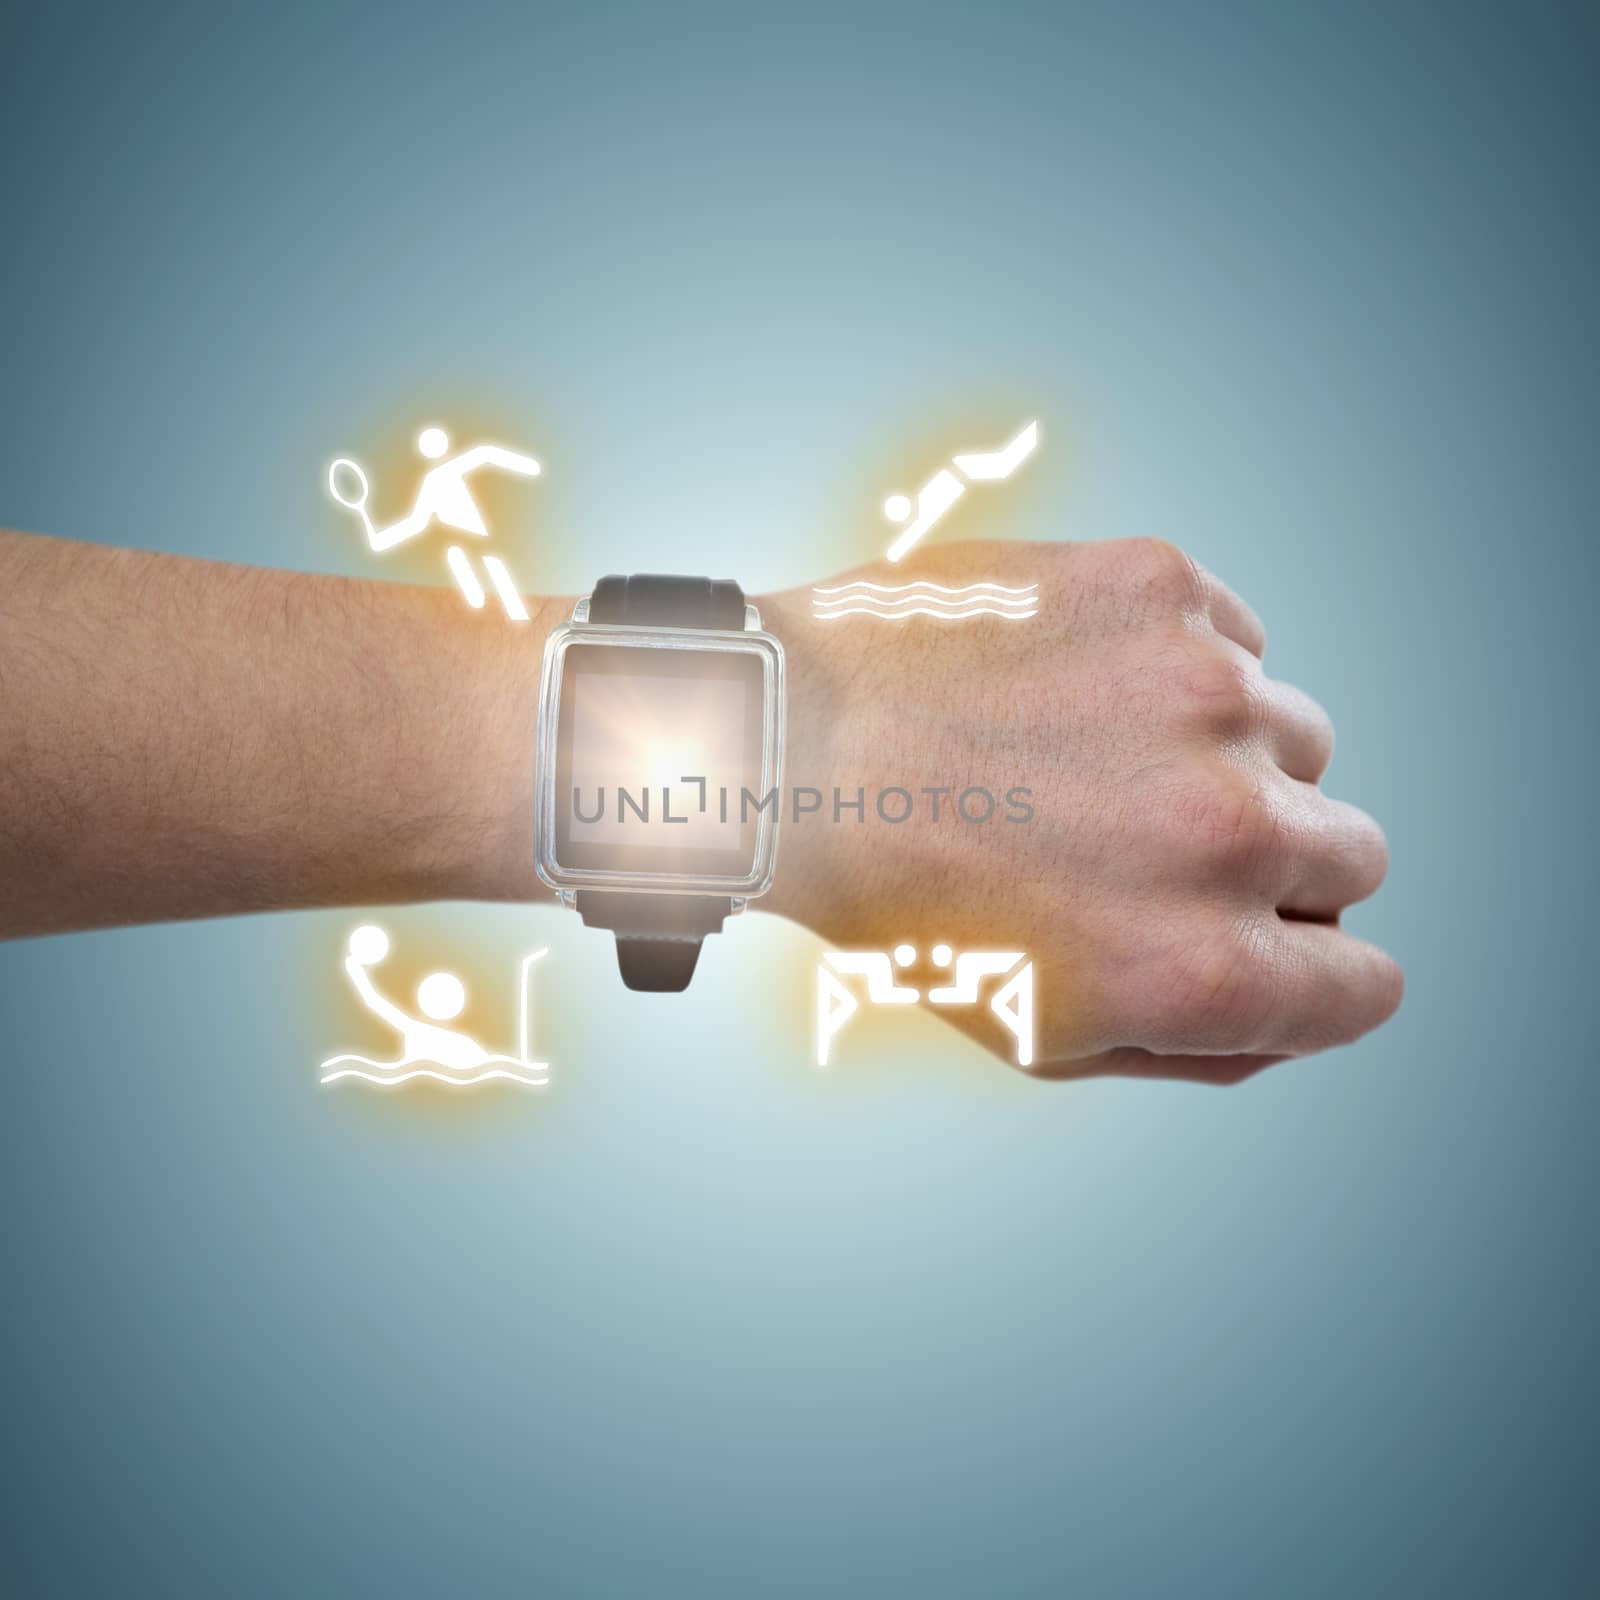 Composite image of cropped image of man wearing watch by Wavebreakmedia